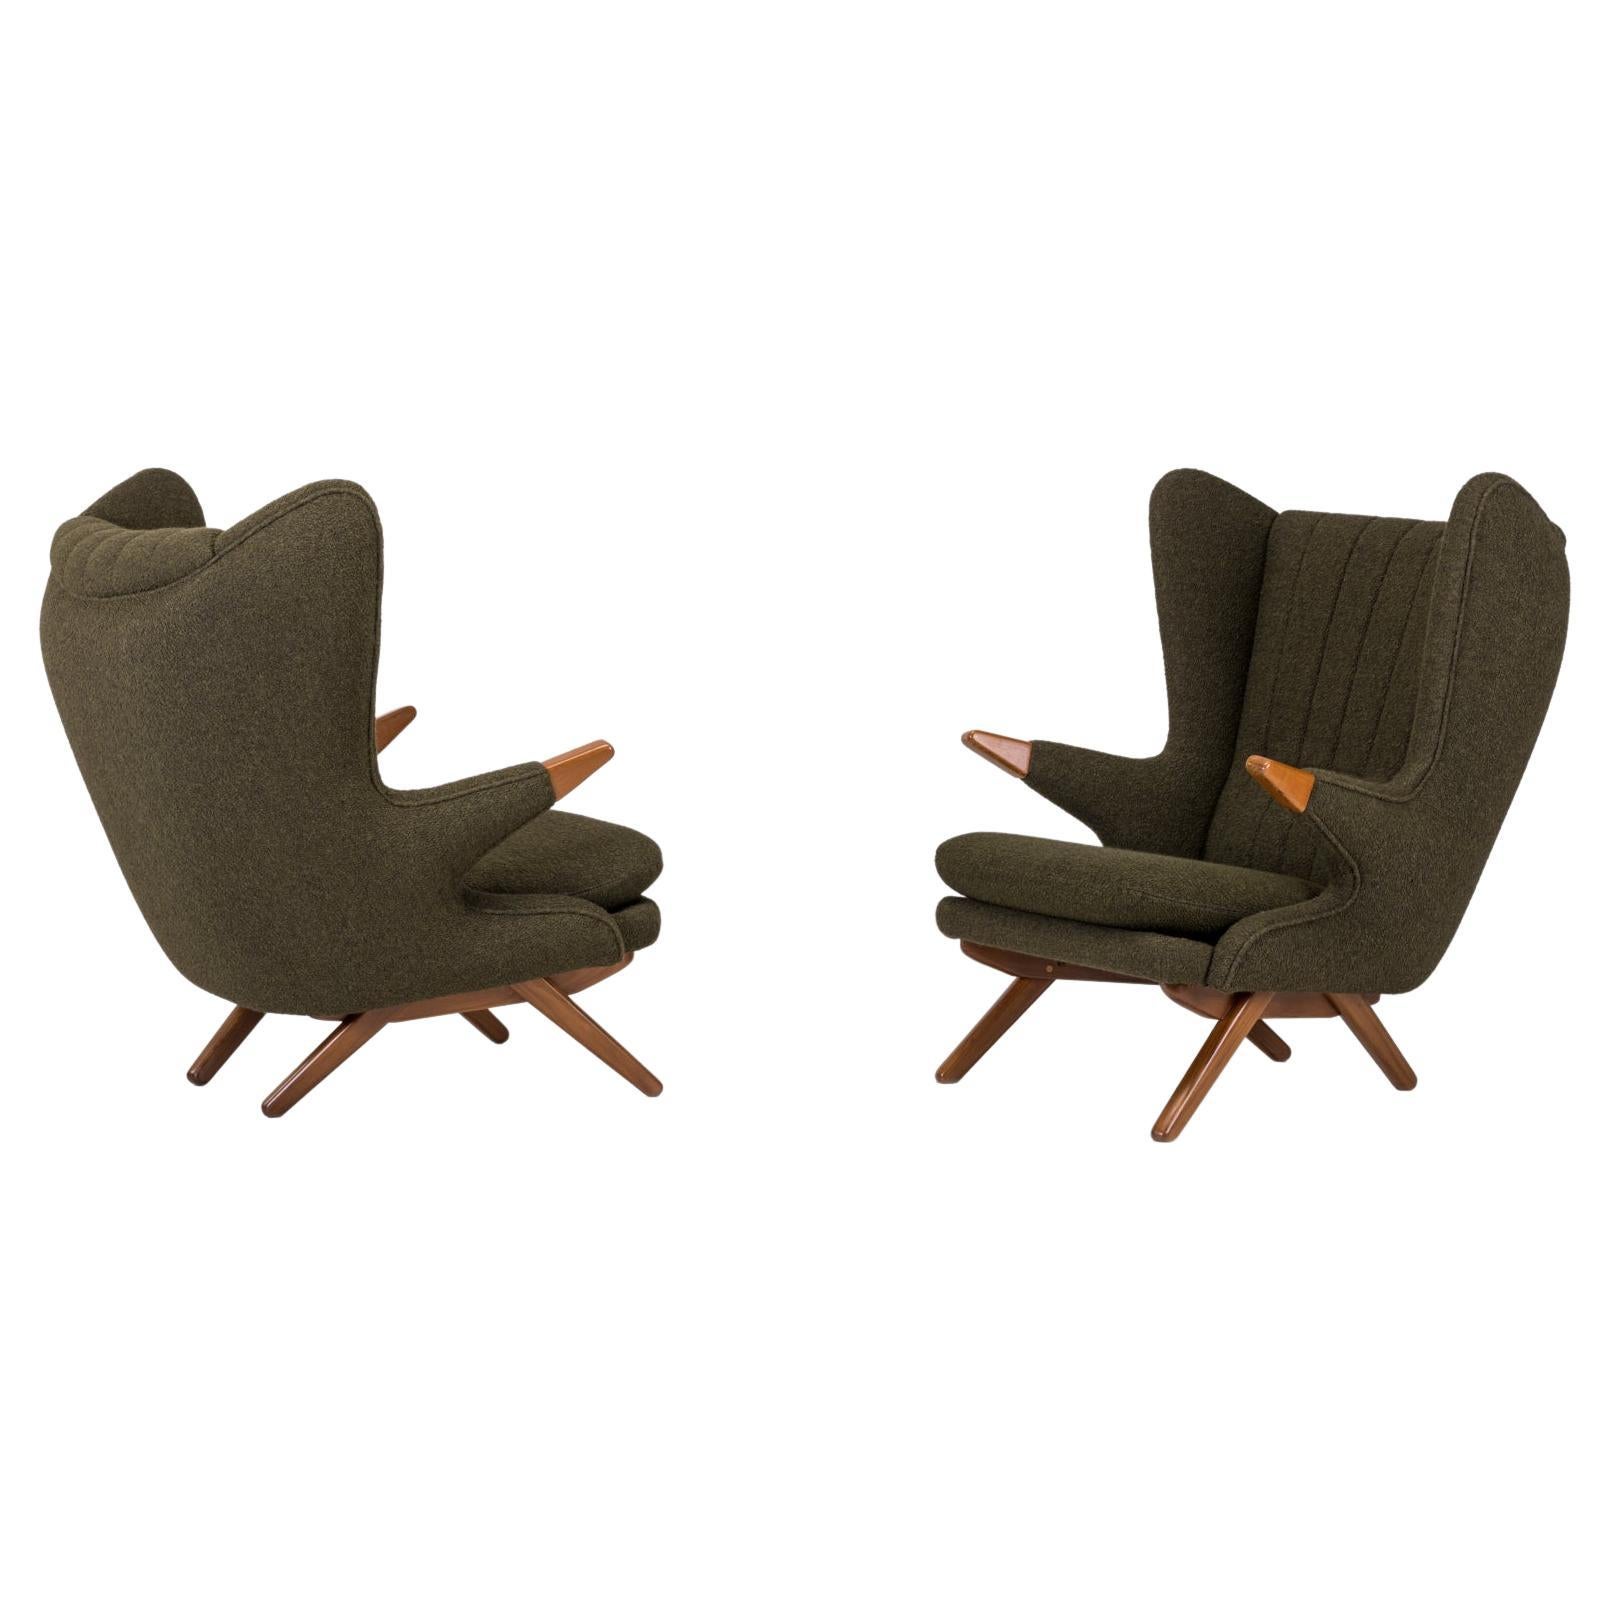 Pair of Svend Skipper “Model 91” Lounge Chairs, Denmark 1950s For Sale